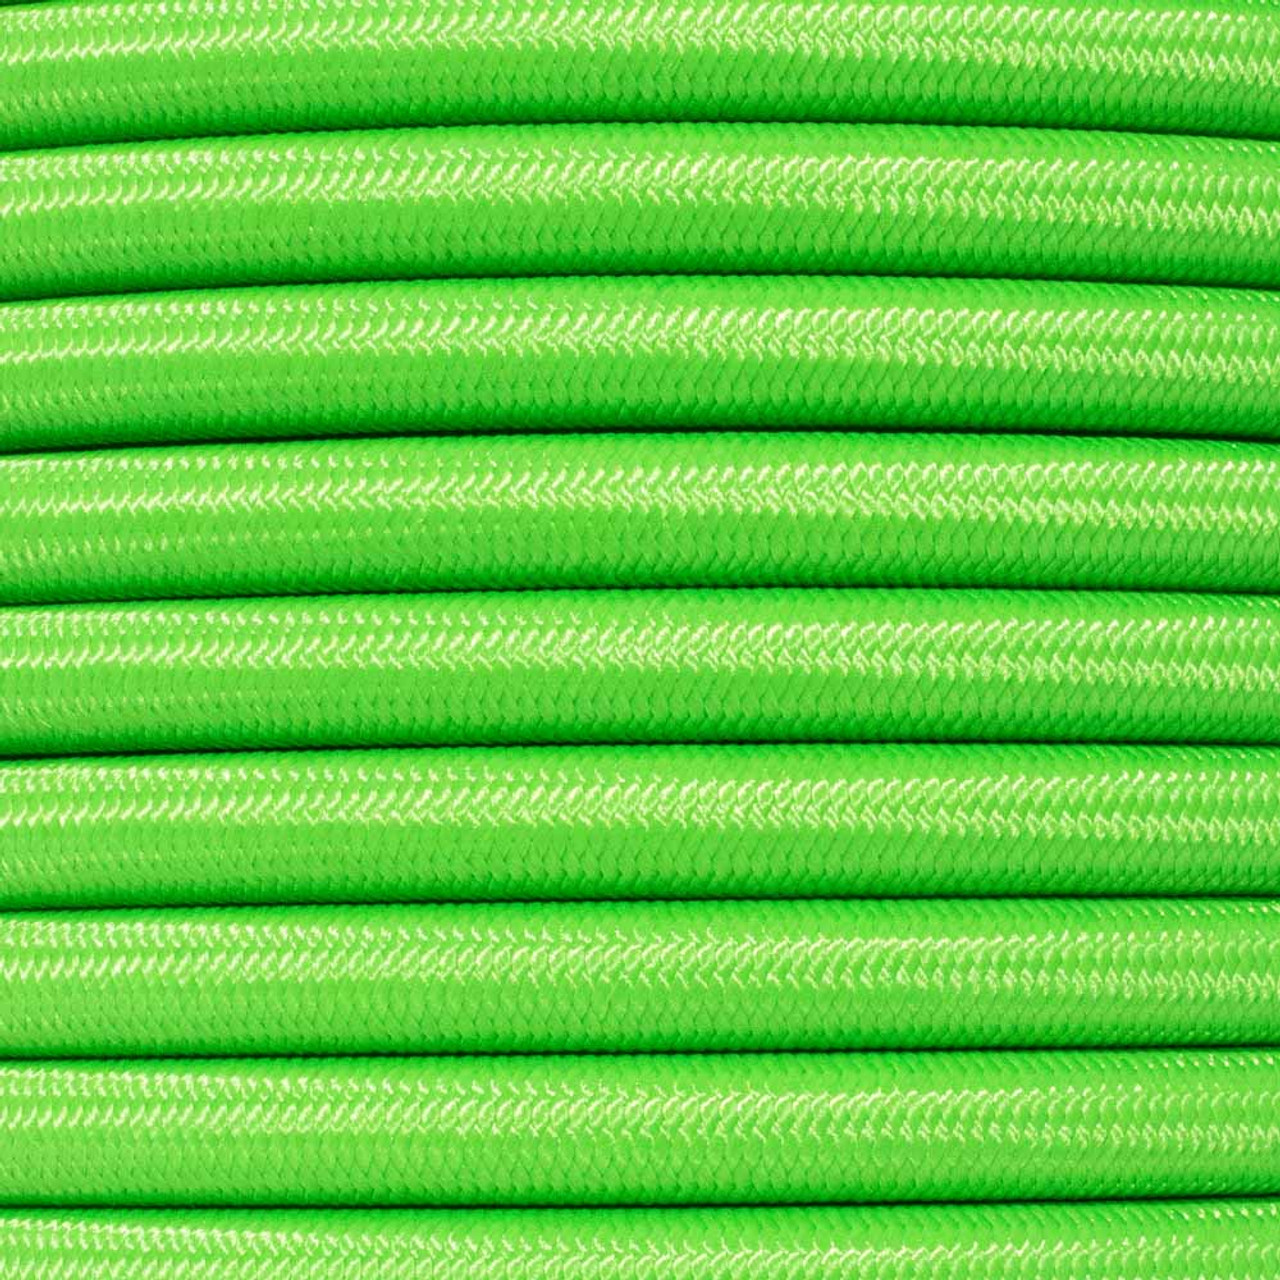 Paracord Planet 3/8 inch Elastic Bungee Nylon Shock Cord Stretch String Crafting - Various Colors - Multiple Lengths - Made in USA, Women's, Size: 25